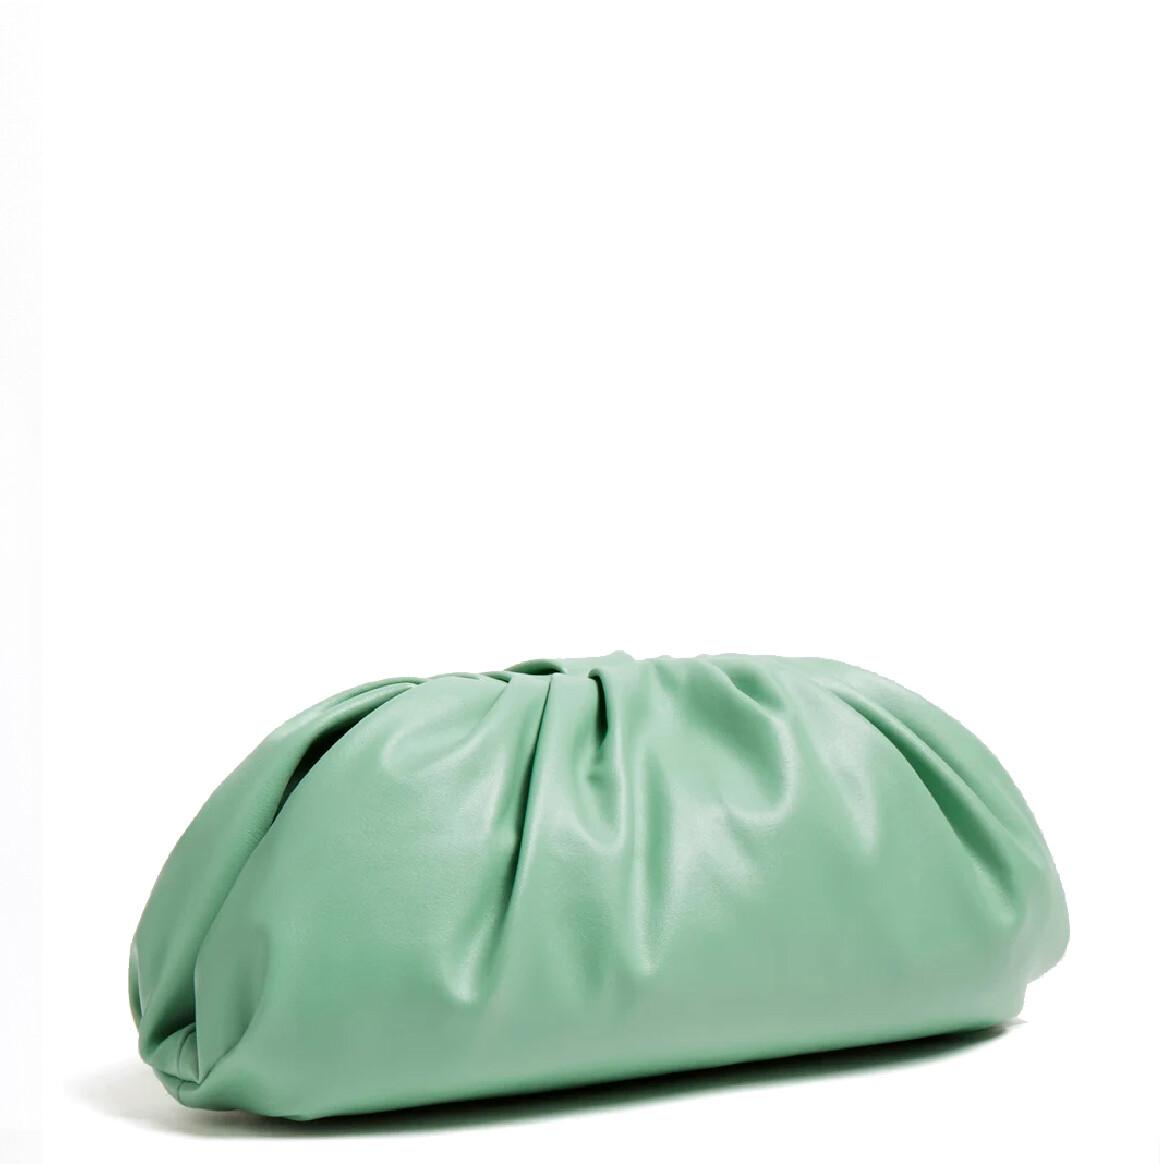 Guess Green Central City Clutch Bag at FORZIERI